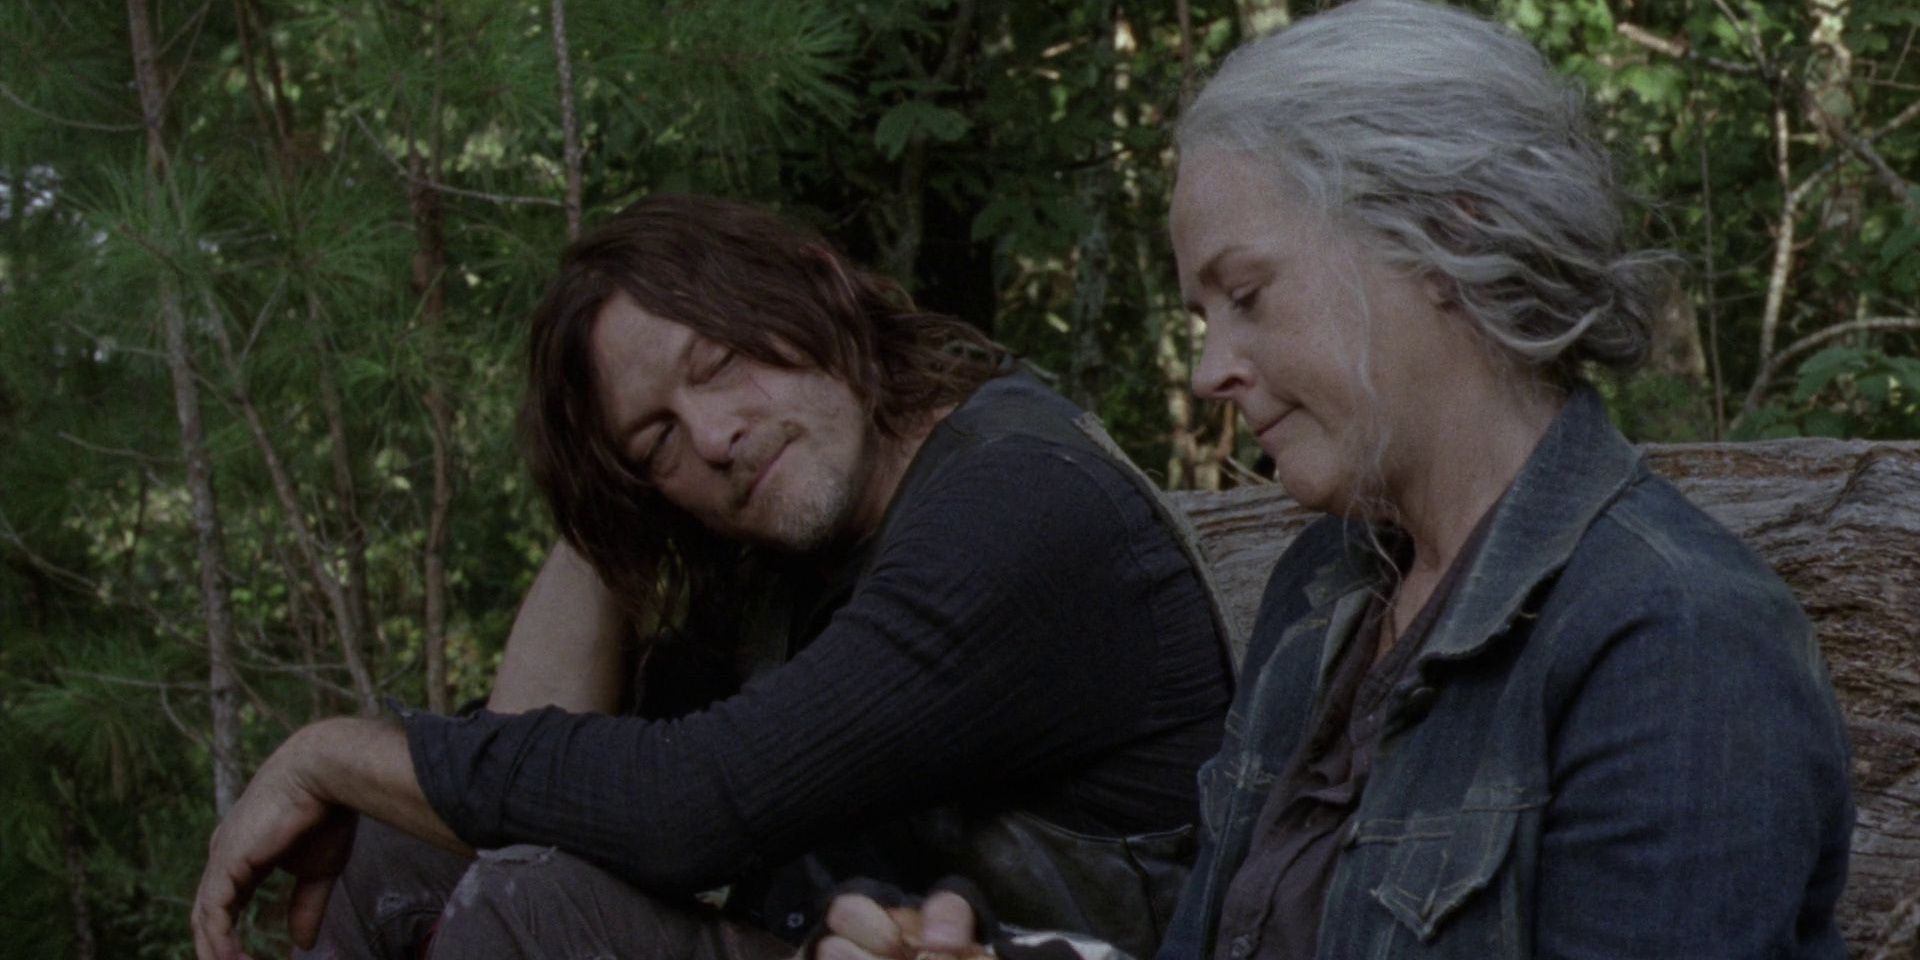 Daryl sits in the woods with Carol and looks at her lovingly in Season 10 Episode 6 of The Walking Dead